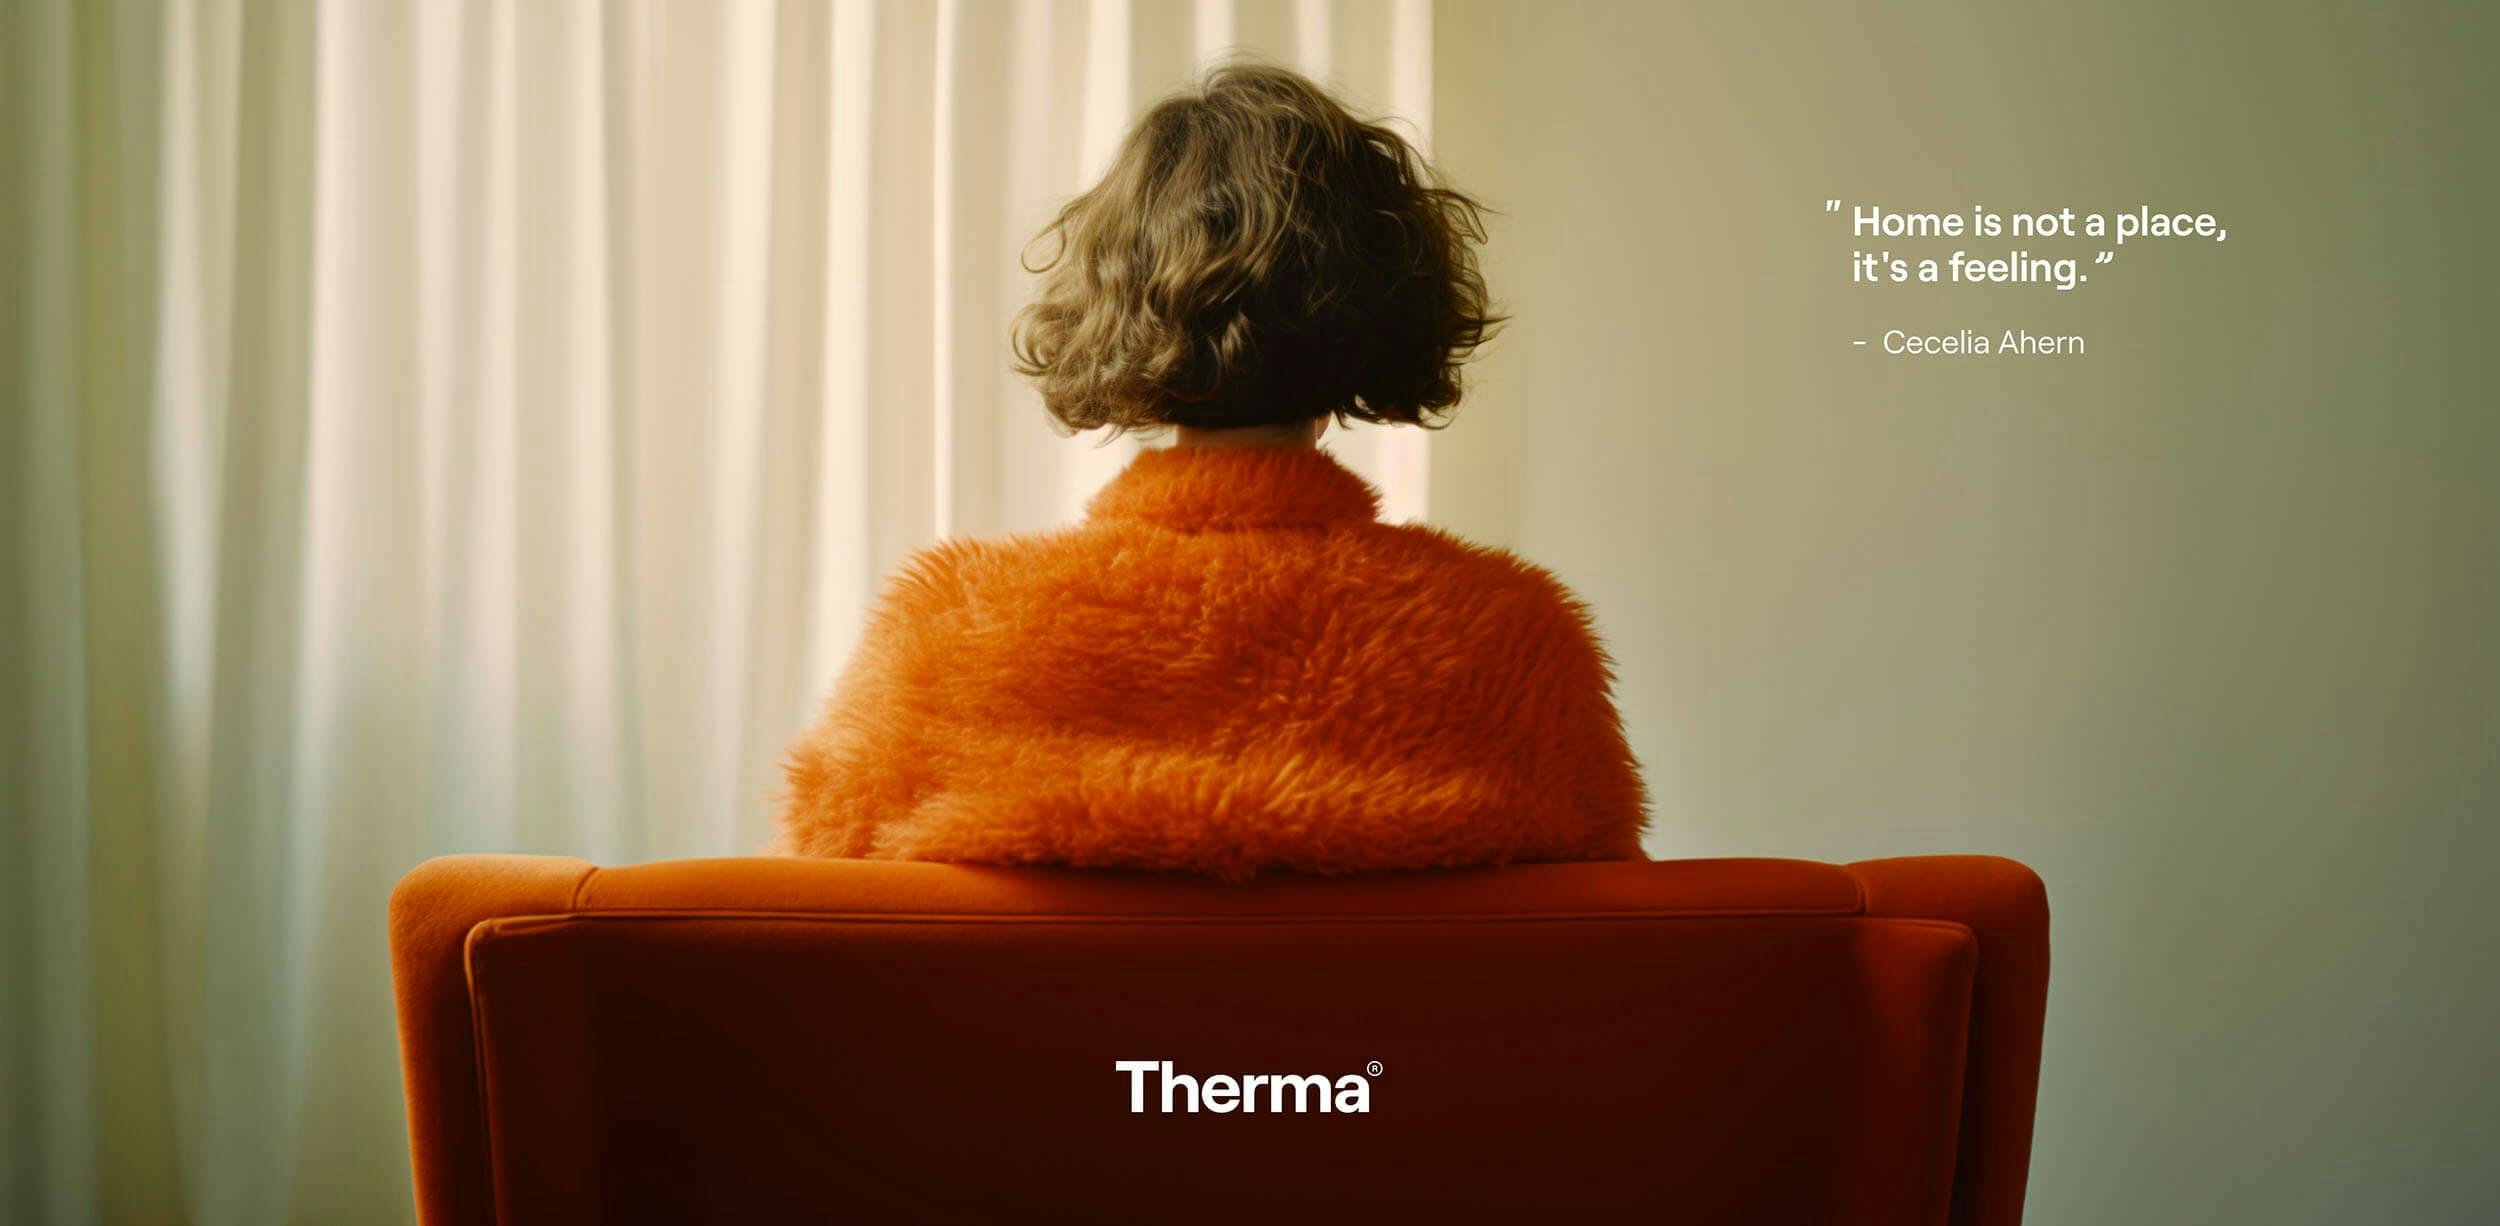 Therma - Art Direction and Typography Design